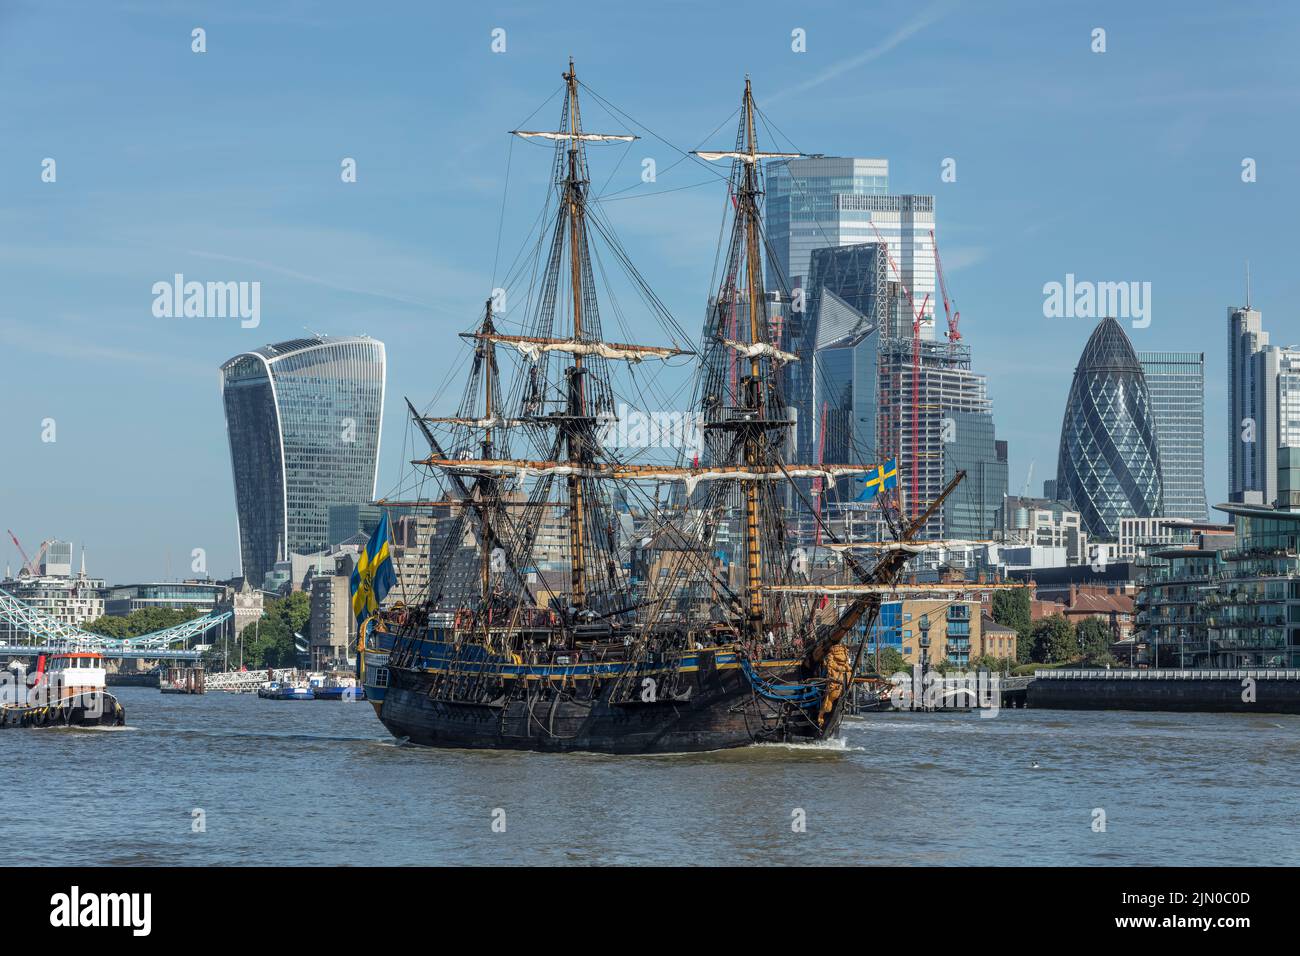 Swedish wooden tall ship Gotheborg on the River Thames near the City of London Stock Photo